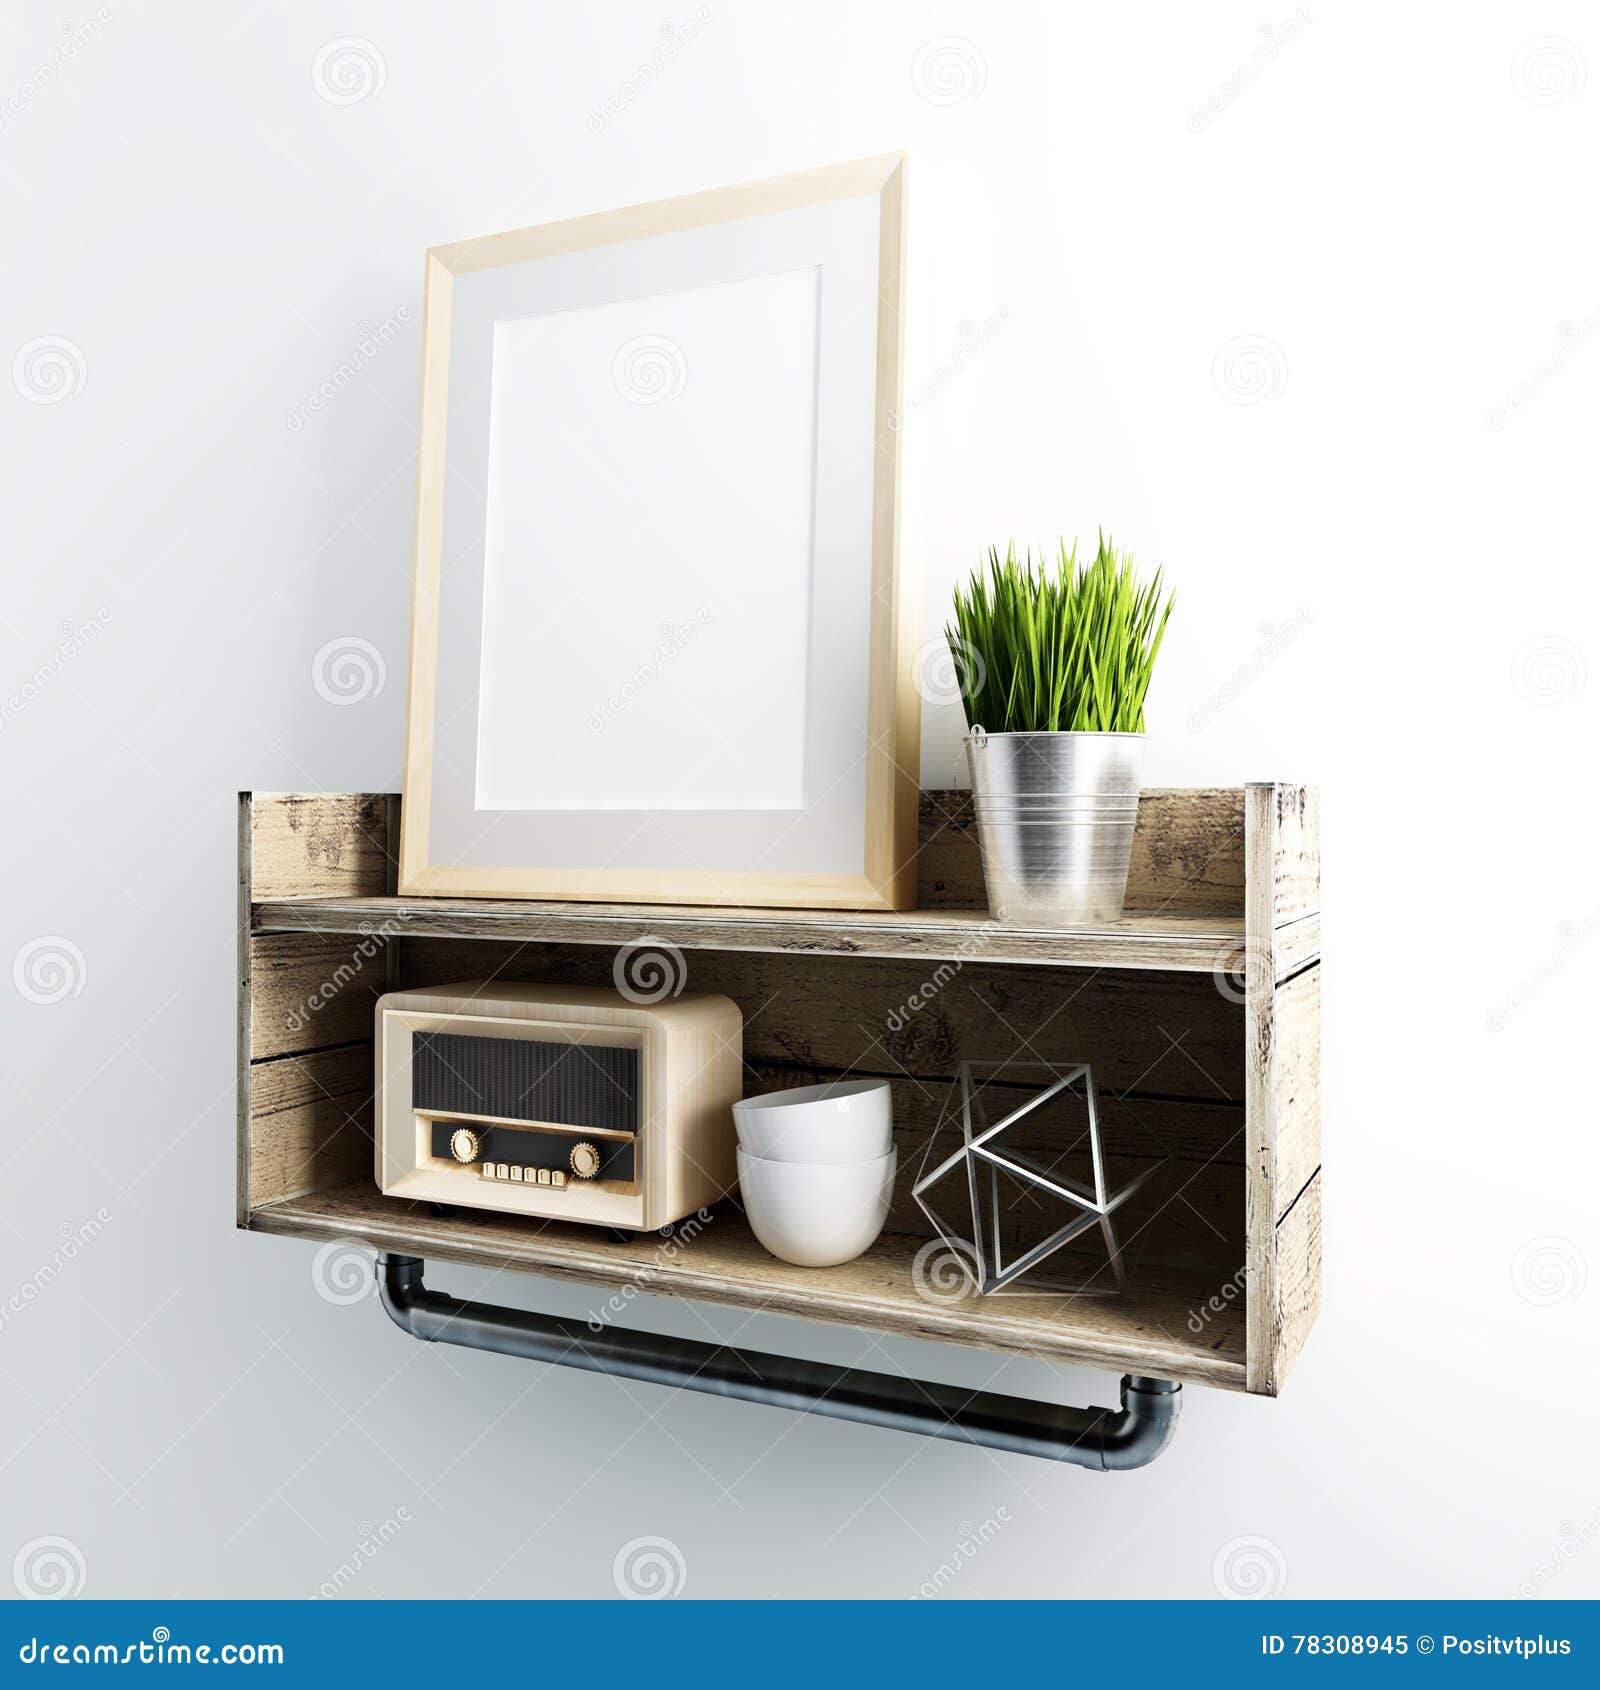 wooden frame hang on industrial style shelve